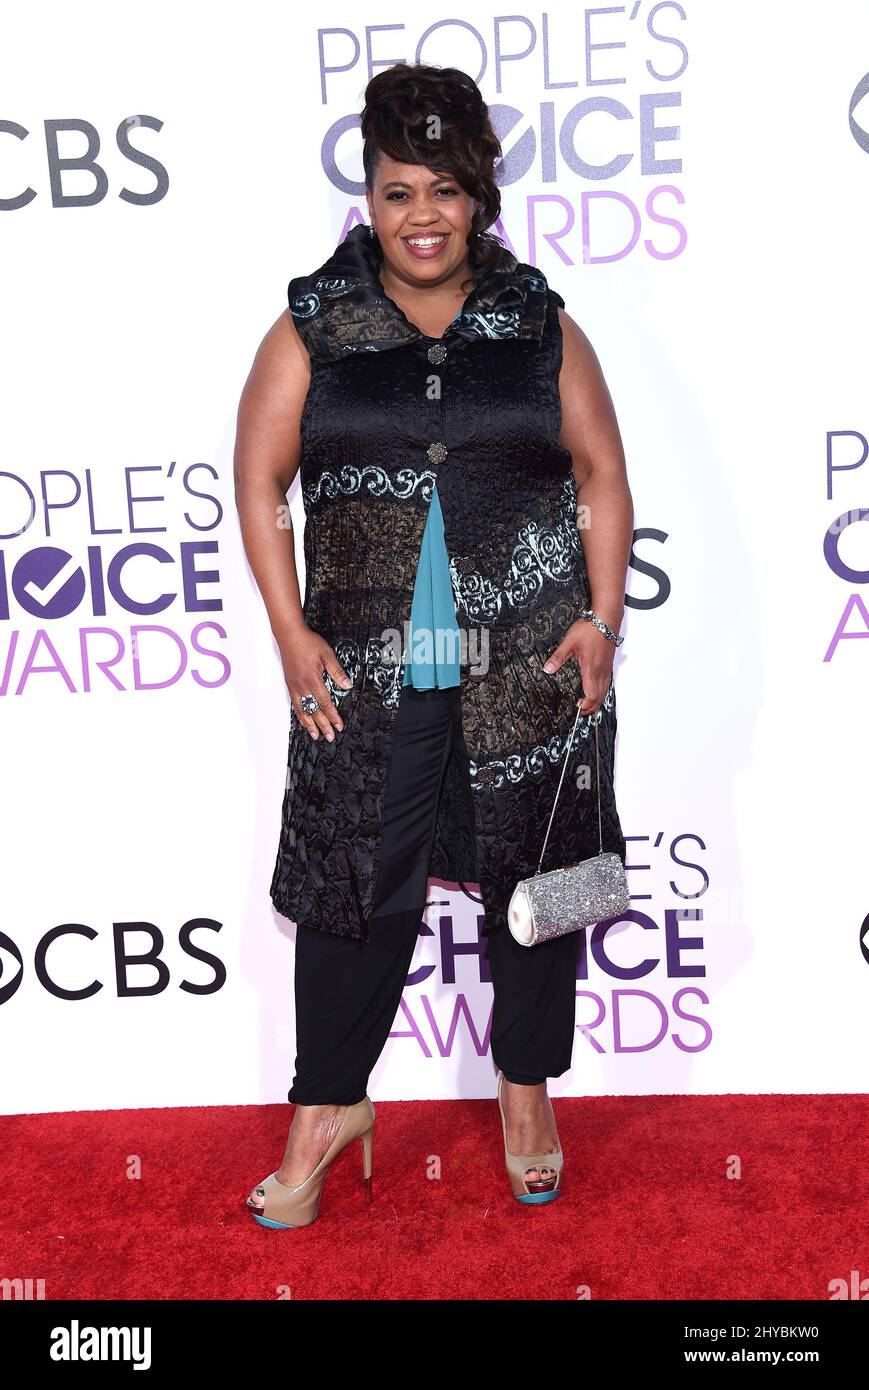 Chandra Wilson nimmt an den People's Choice Awards 2017 im Microsoft Theater L.A. Teil Live in LSO Angeles, USA Stockfoto